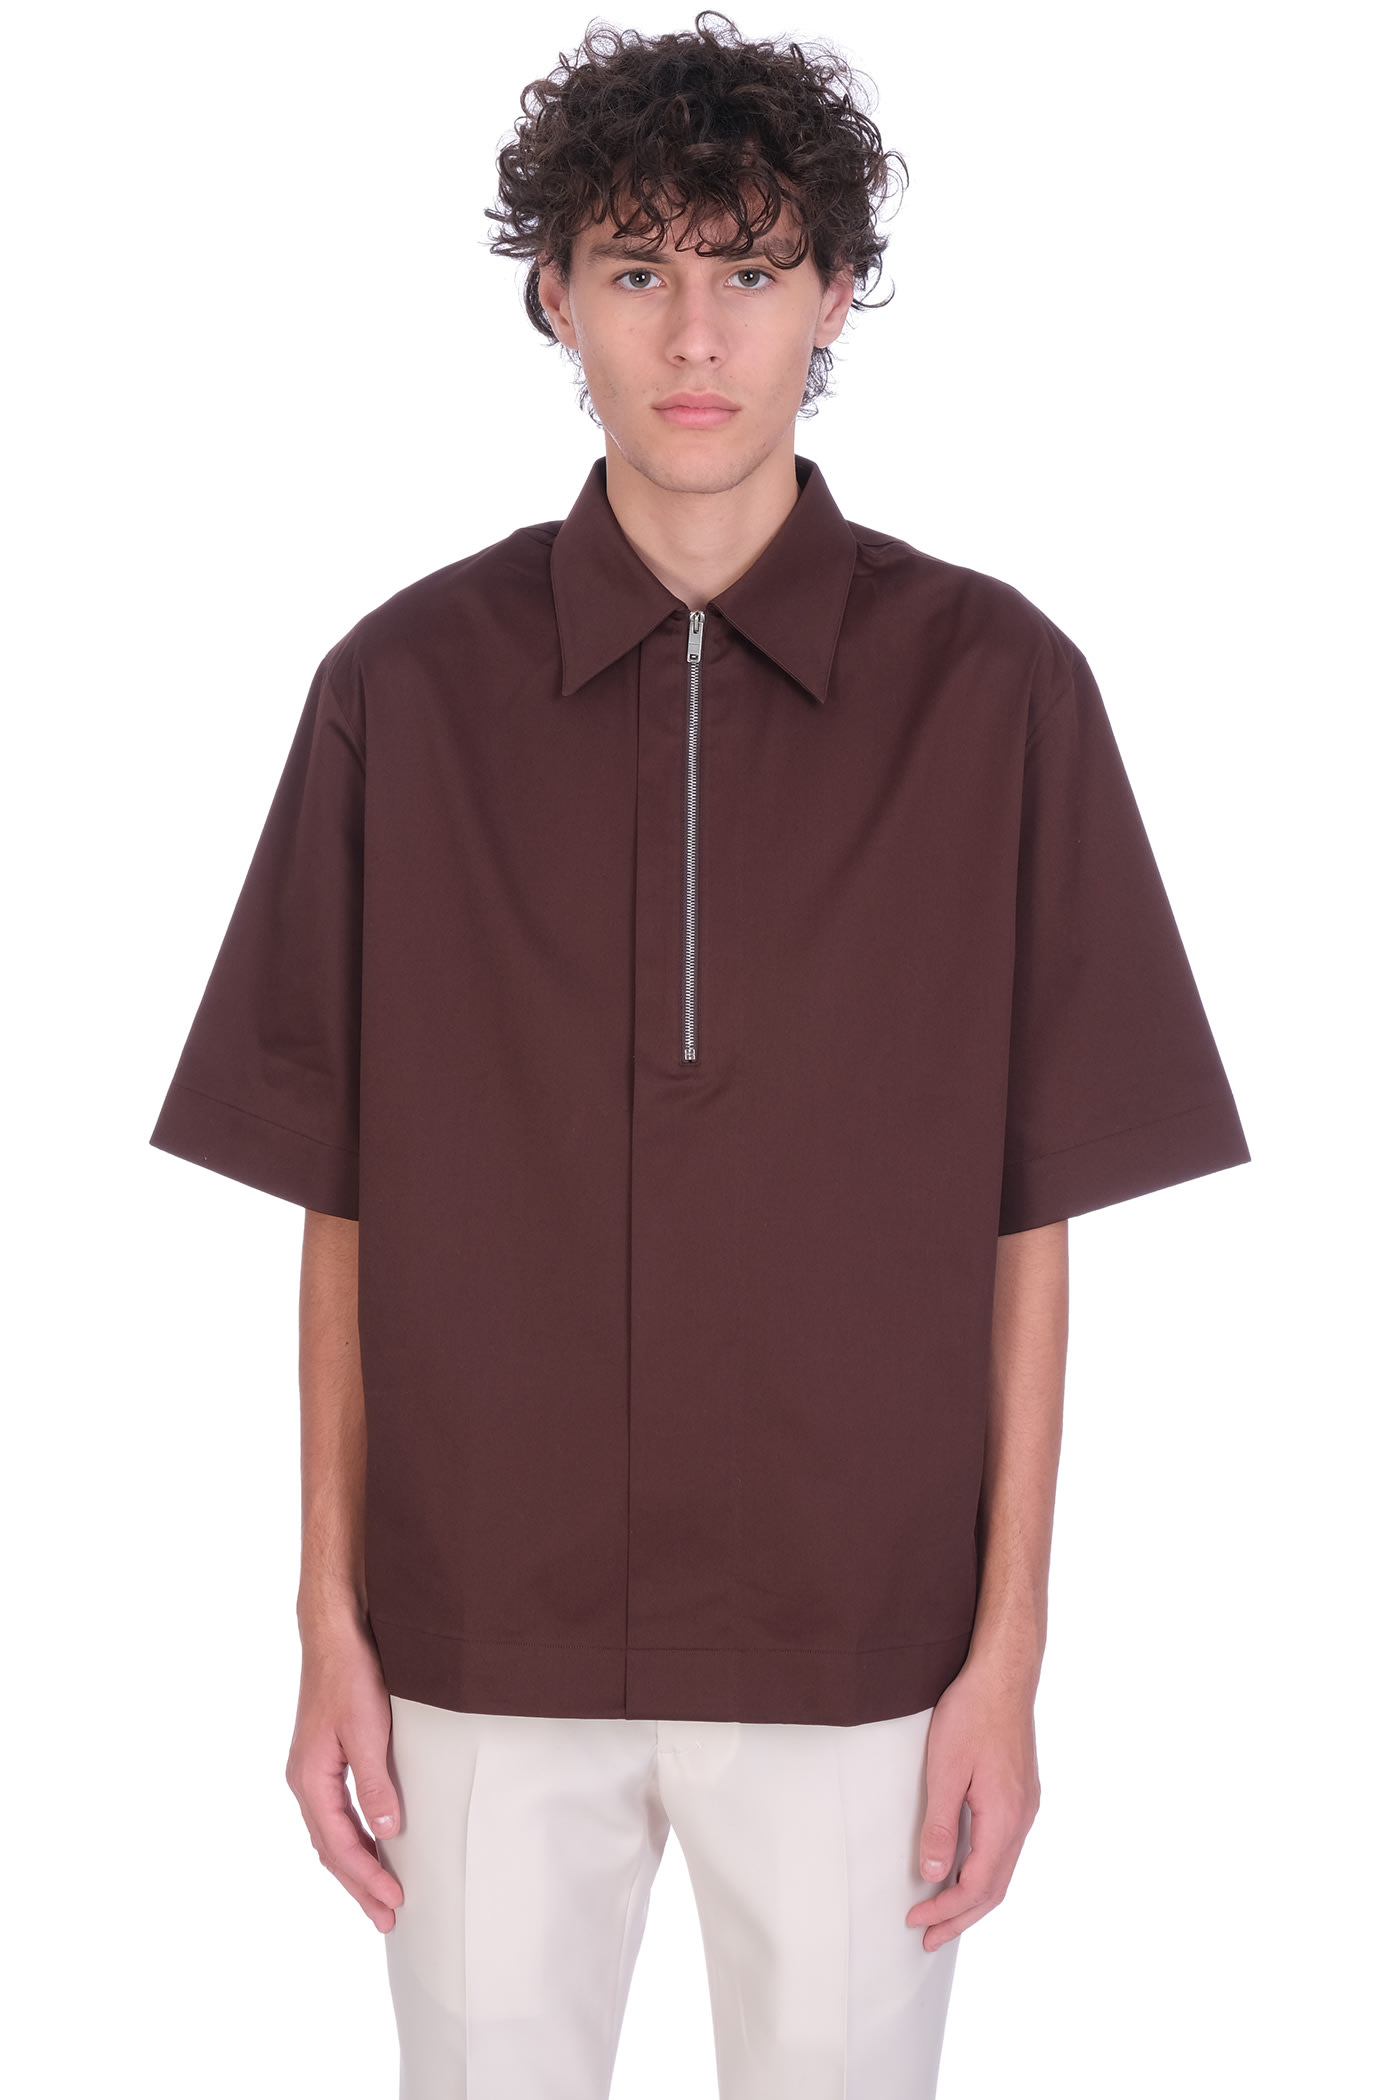 Givenchy Shirt In Brown Cotton